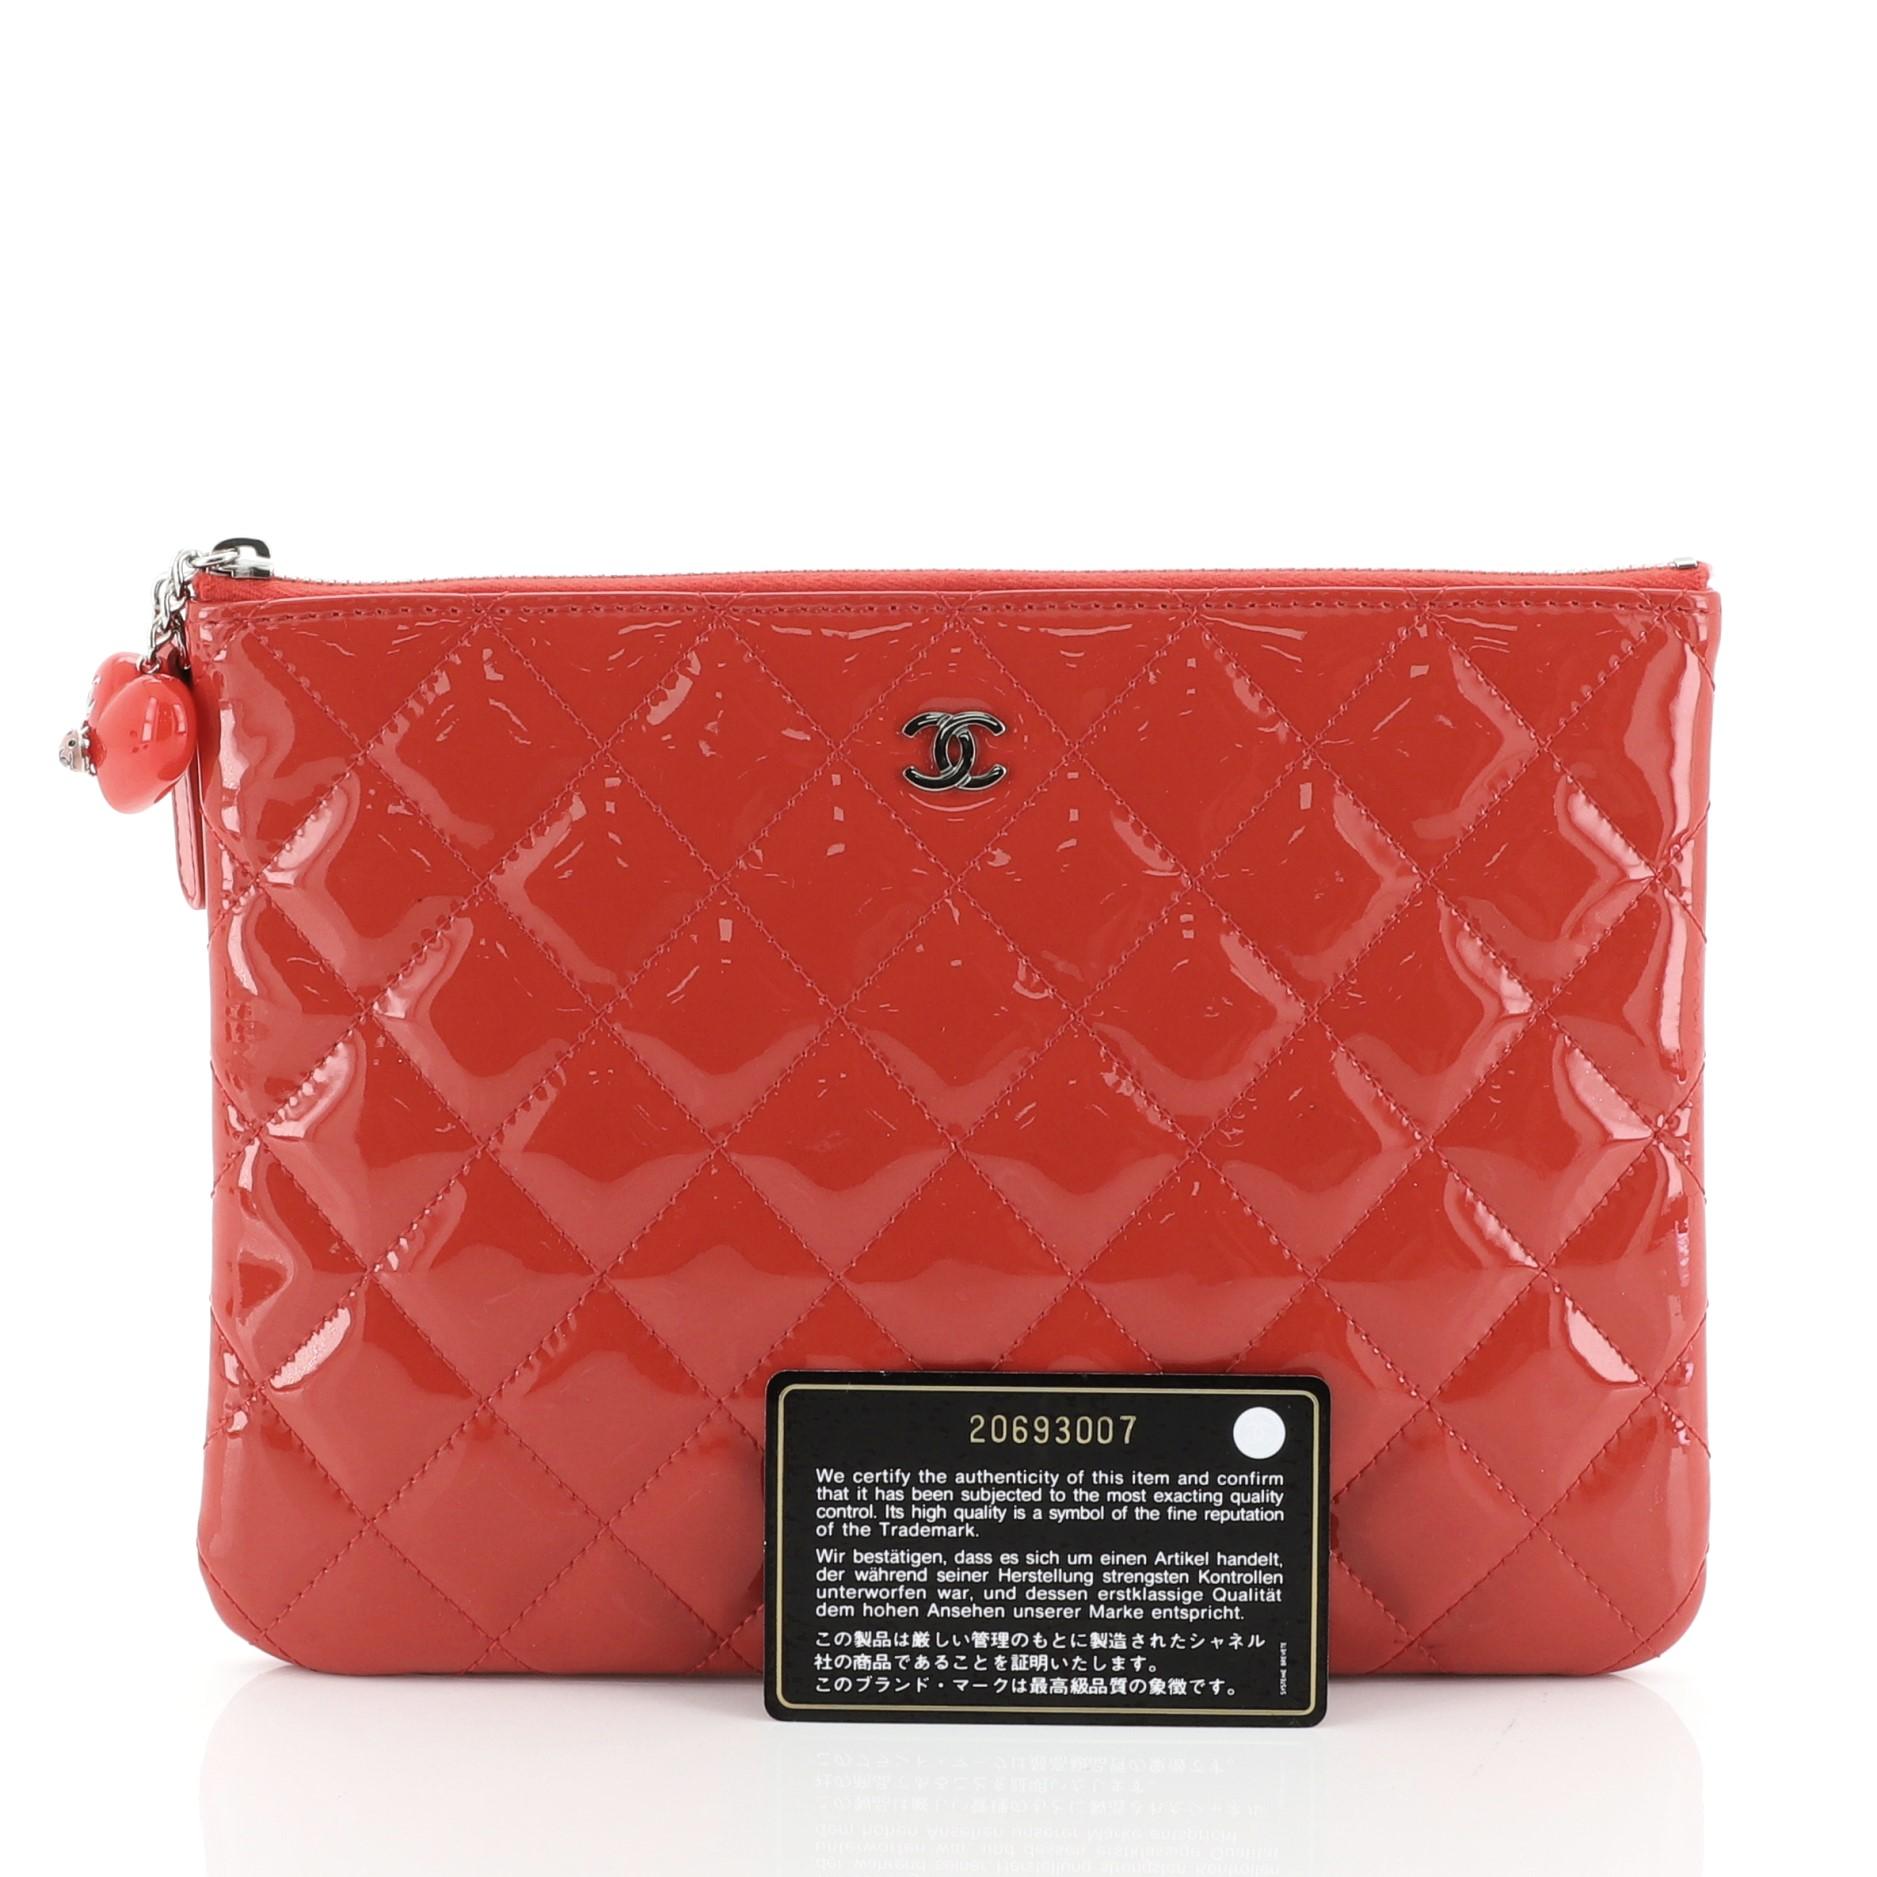 This Chanel Valentine Hearts O Case Clutch Quilted Patent Small, crafted from red quilted patent leather, features heart charm with a ladybug detail on zipper pull, CC logo at front, and silver-tone hardware. Its zip closure opens to a red nylon